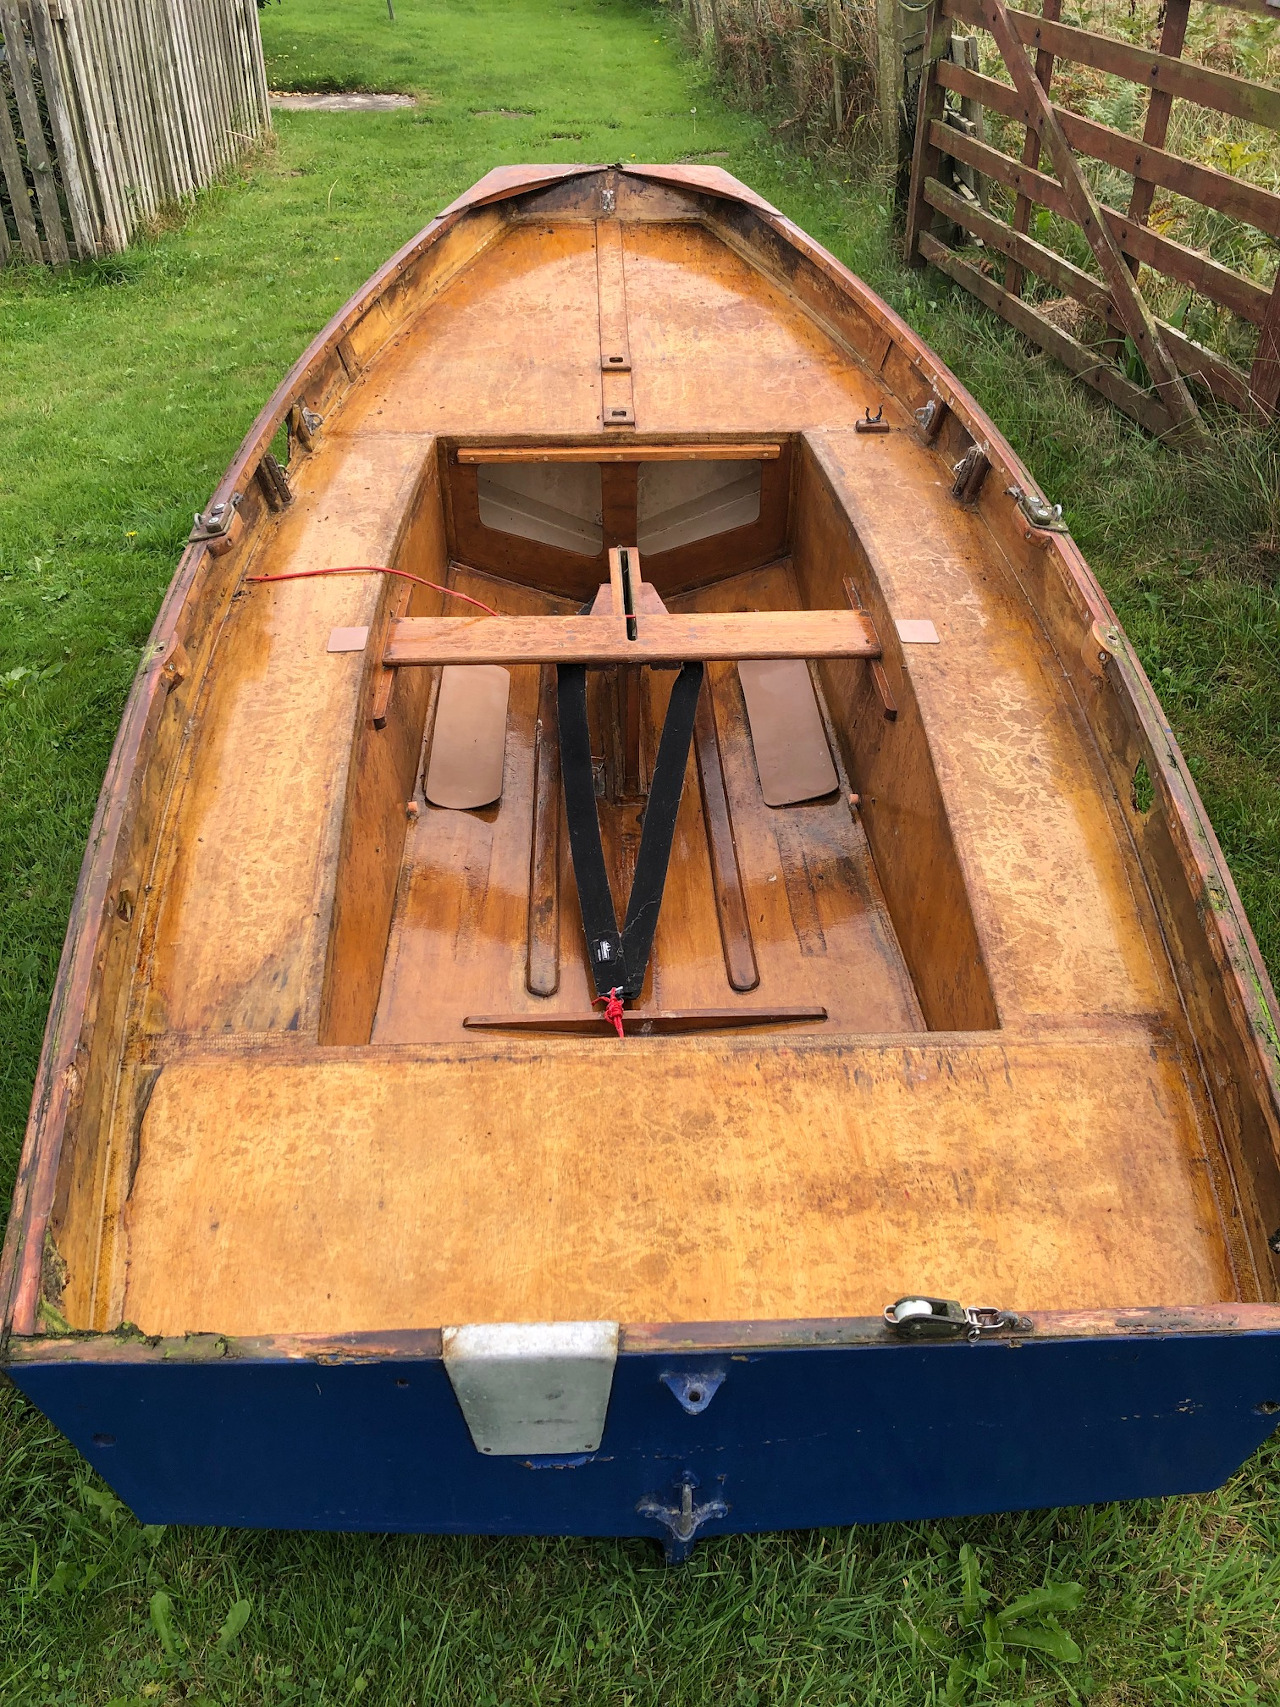 An old blue wooden Mirror dinghy hull with a small hole in the topsides in a garden 